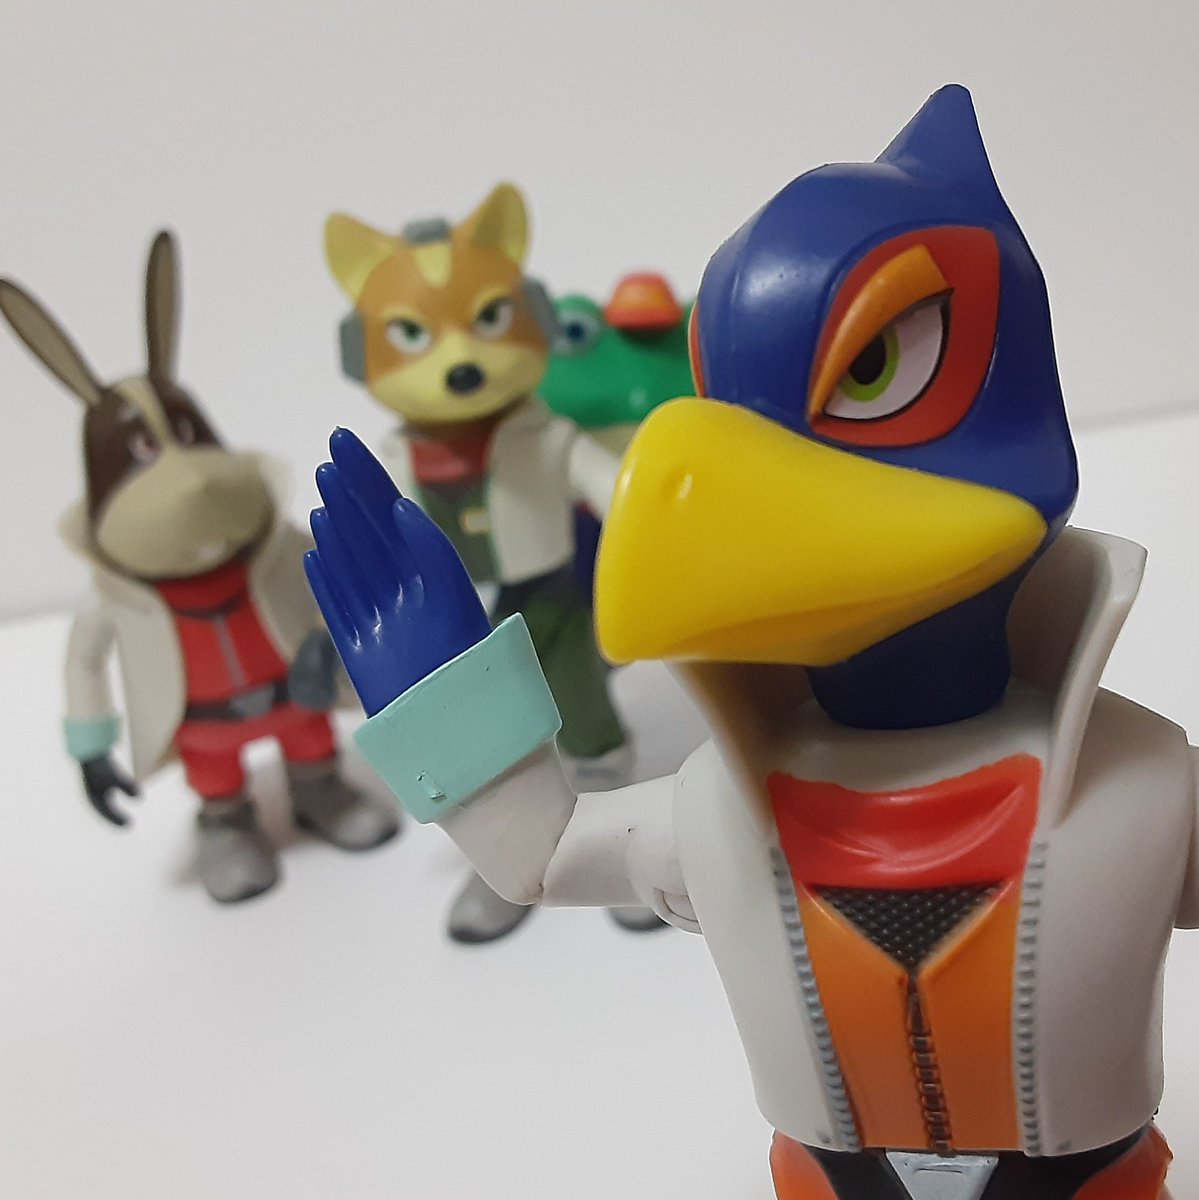 Its midnight!Time for  #Toytober 10-2!World of Nintendo 4' Star Fox Falco Lombardi (2015)This Jakks Pacific figure of the S-Tier Melee staple was so hard to come by for a while for me. Em was able to snag it for my birthday one year when it was weirdly widely available again.